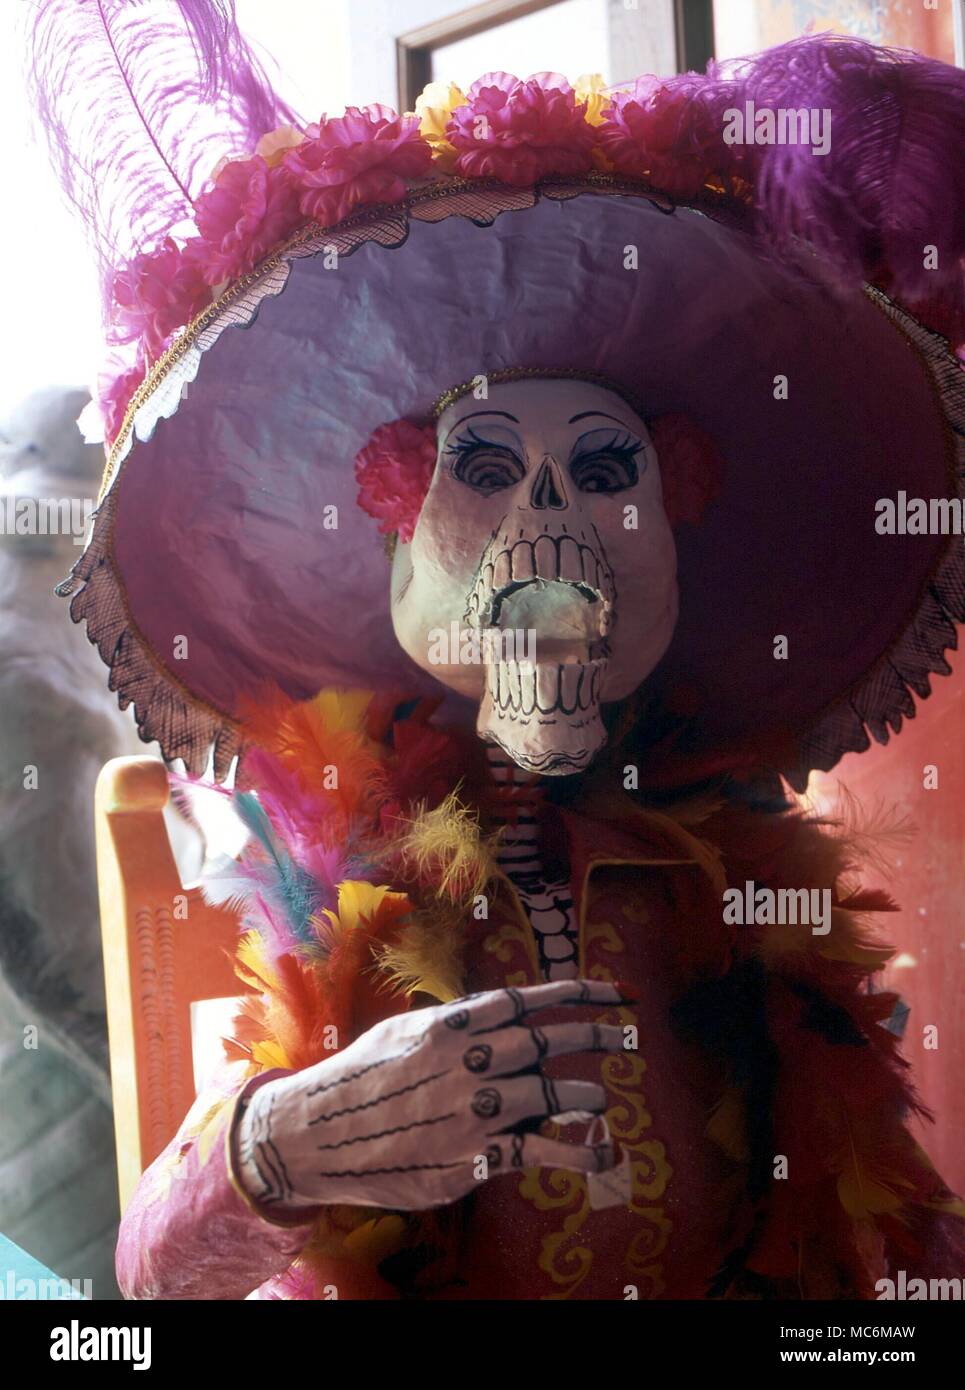 DEATH - DEATH - FESTIVAL OF THE DEAD. The Mexican Fiesta de Muertos, beginning 1st November, involves a long preparation of crude (and even artistic) images of Death in the form of skeletons. Examples from Oaxaca Stock Photo